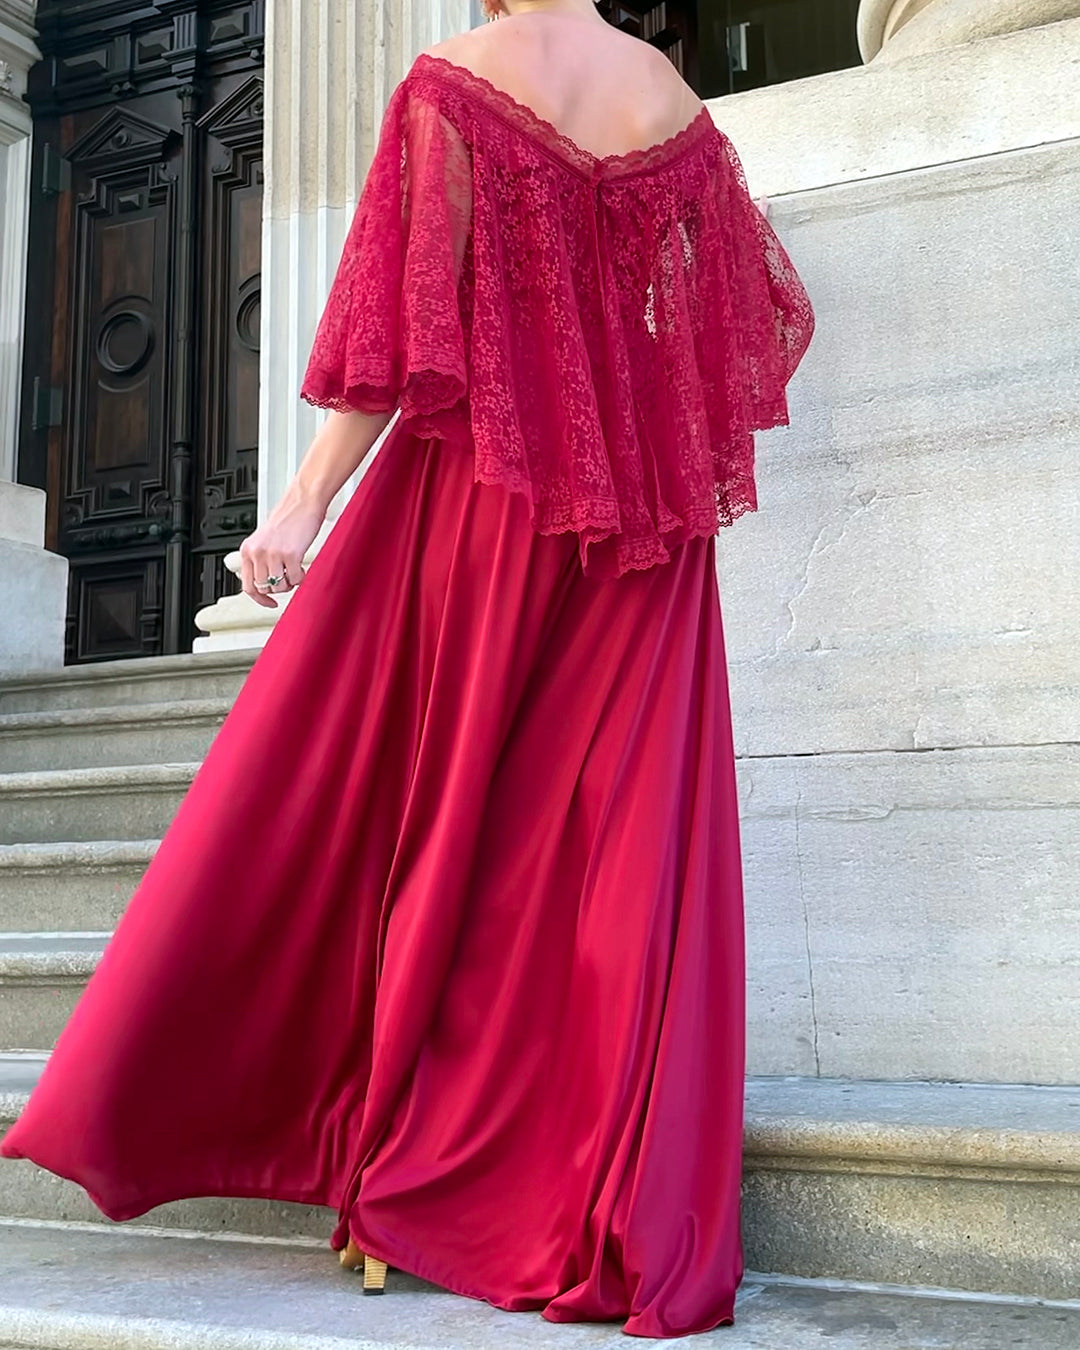 VINTAGE 1970s CRANBERRY GOWN WITH LACE BERTHA COLLAR